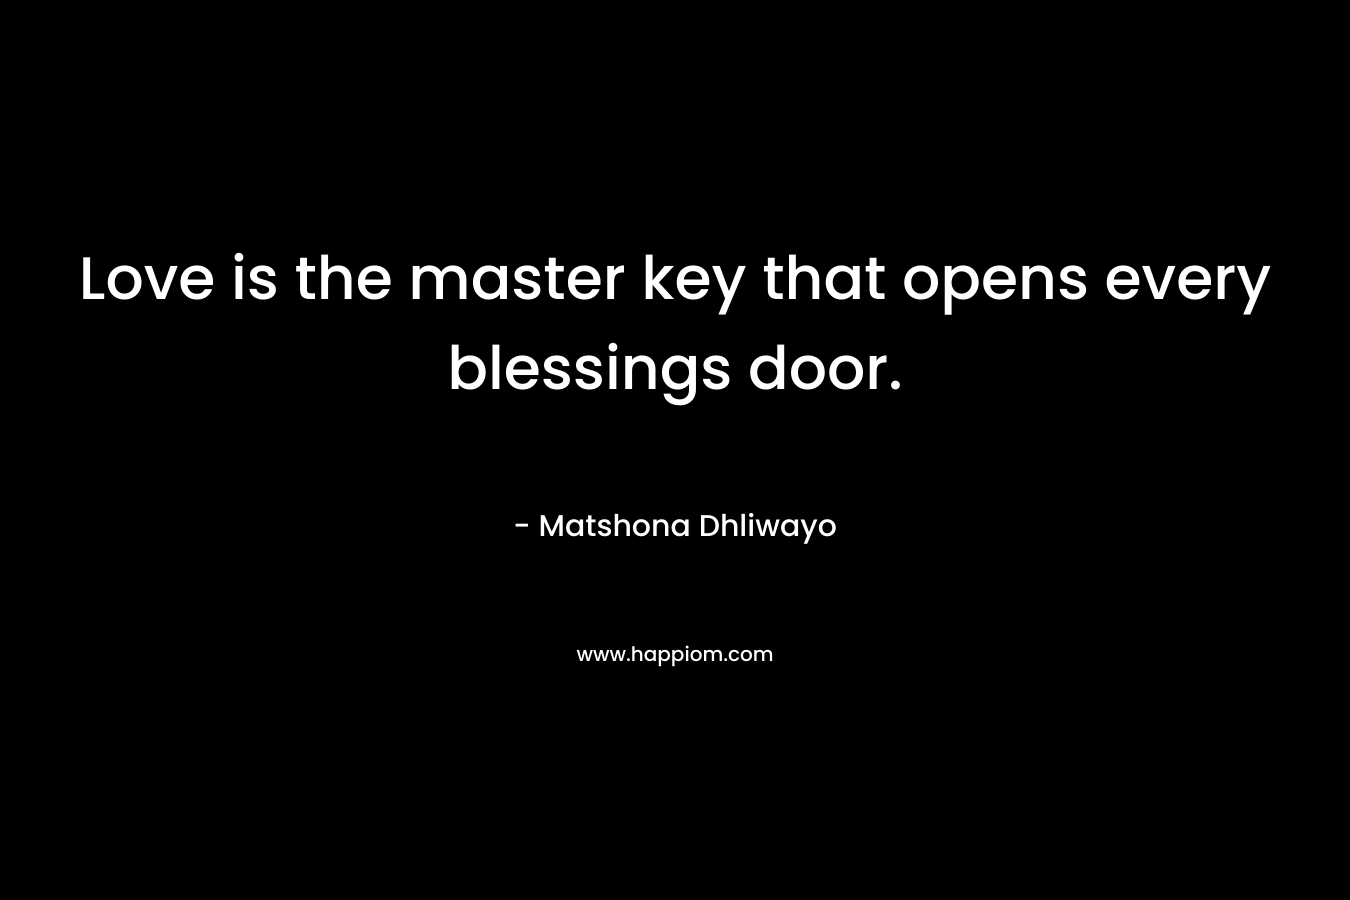 Love is the master key that opens every blessings door. – Matshona Dhliwayo